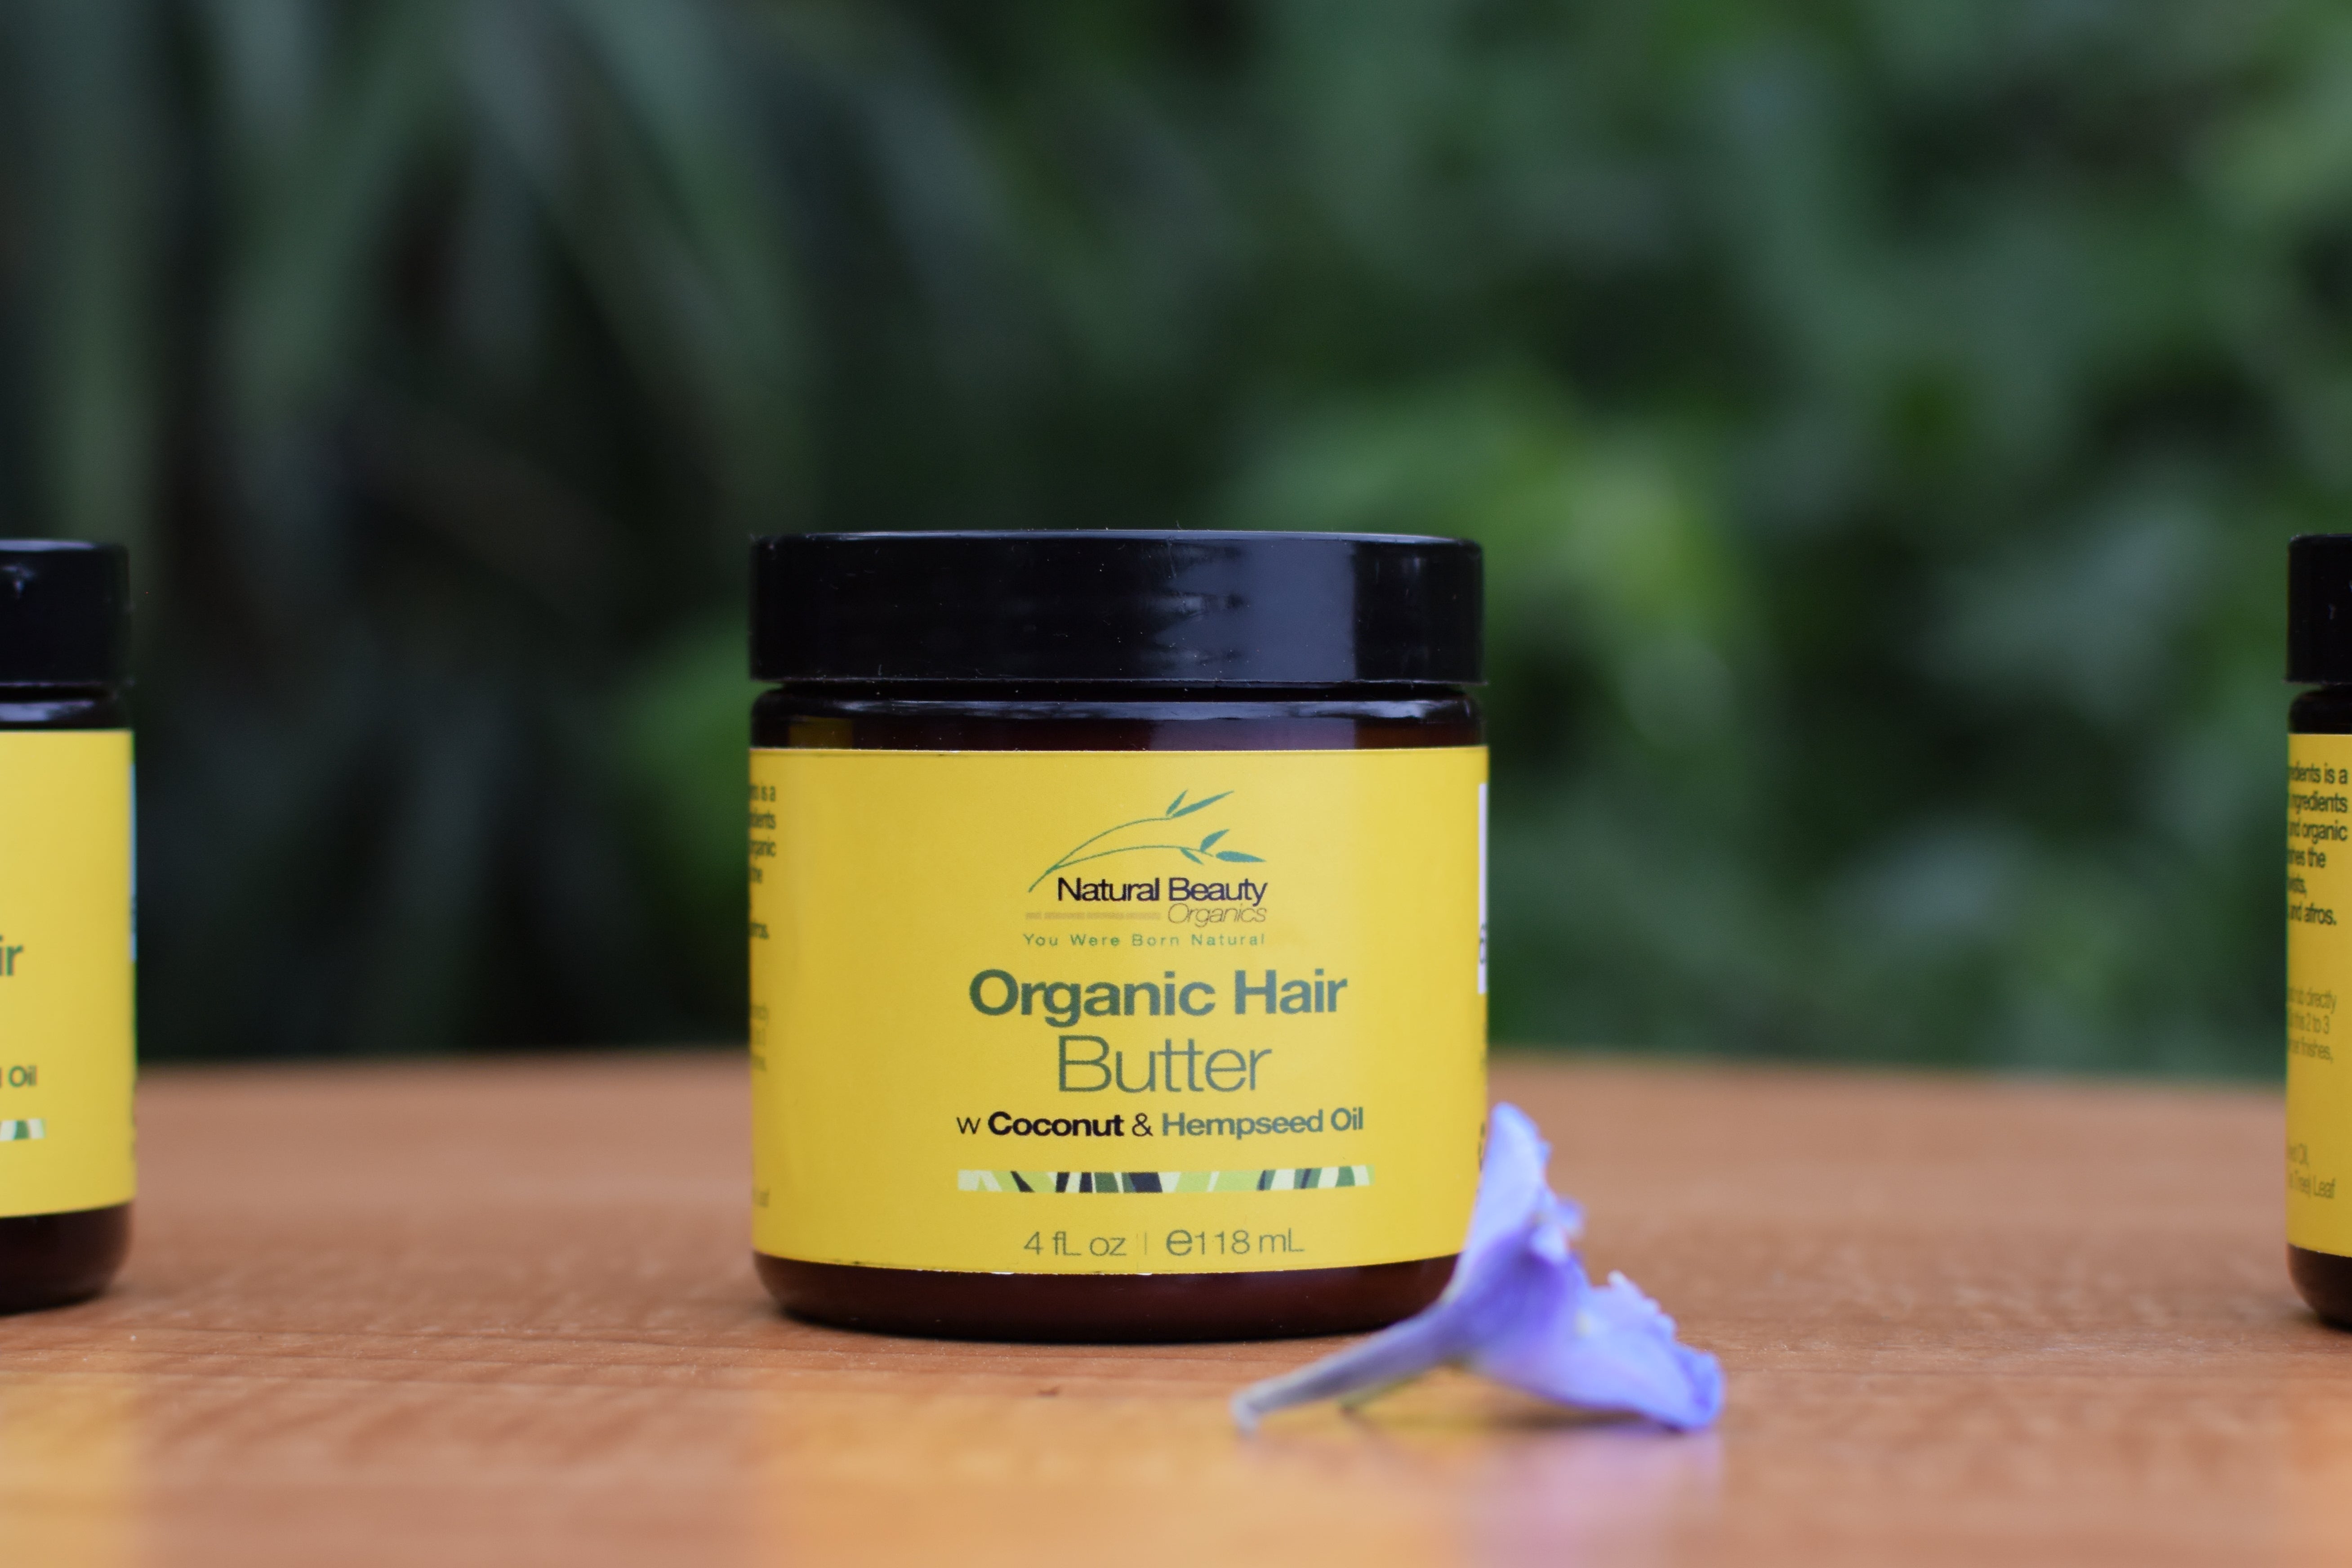 Organic Hair Butter! Deliciousness for the Hair.